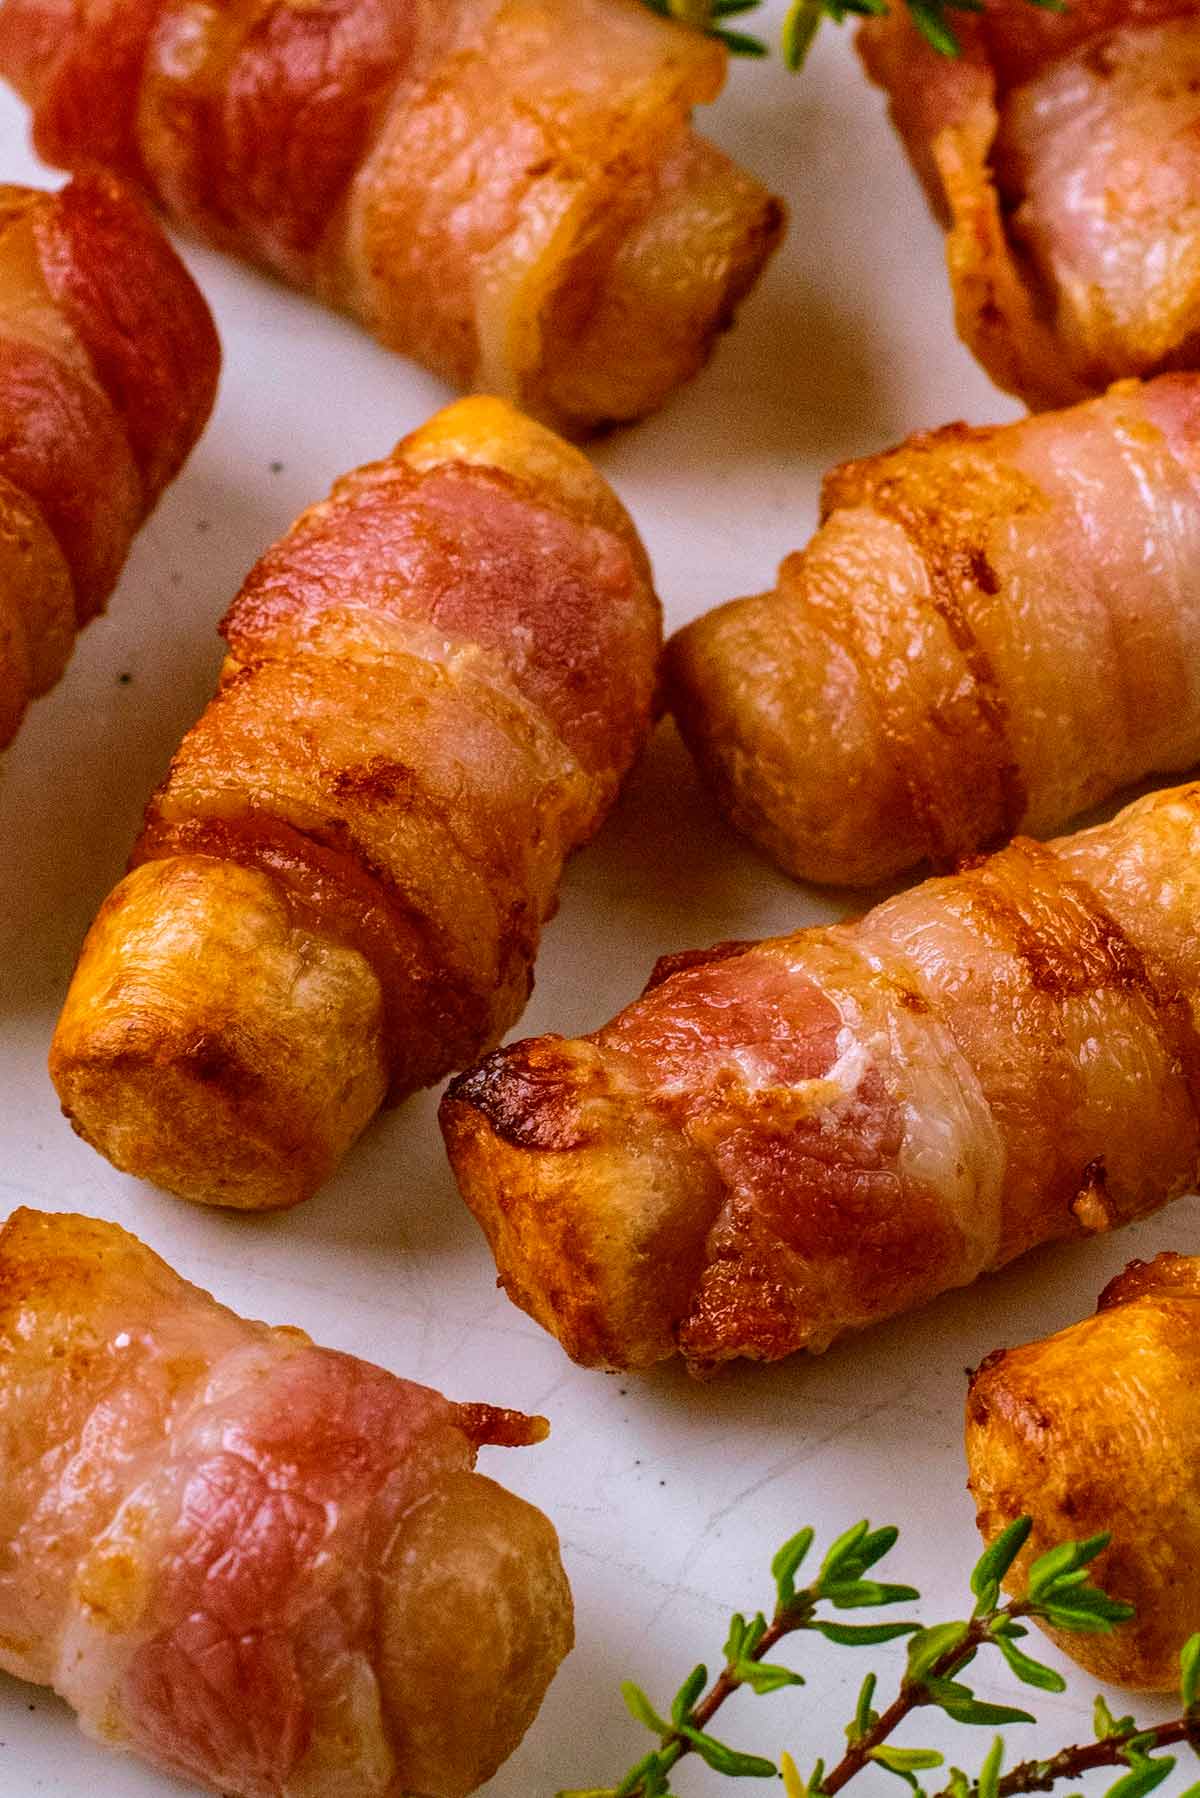 A pile of pigs in blankets on a plate.